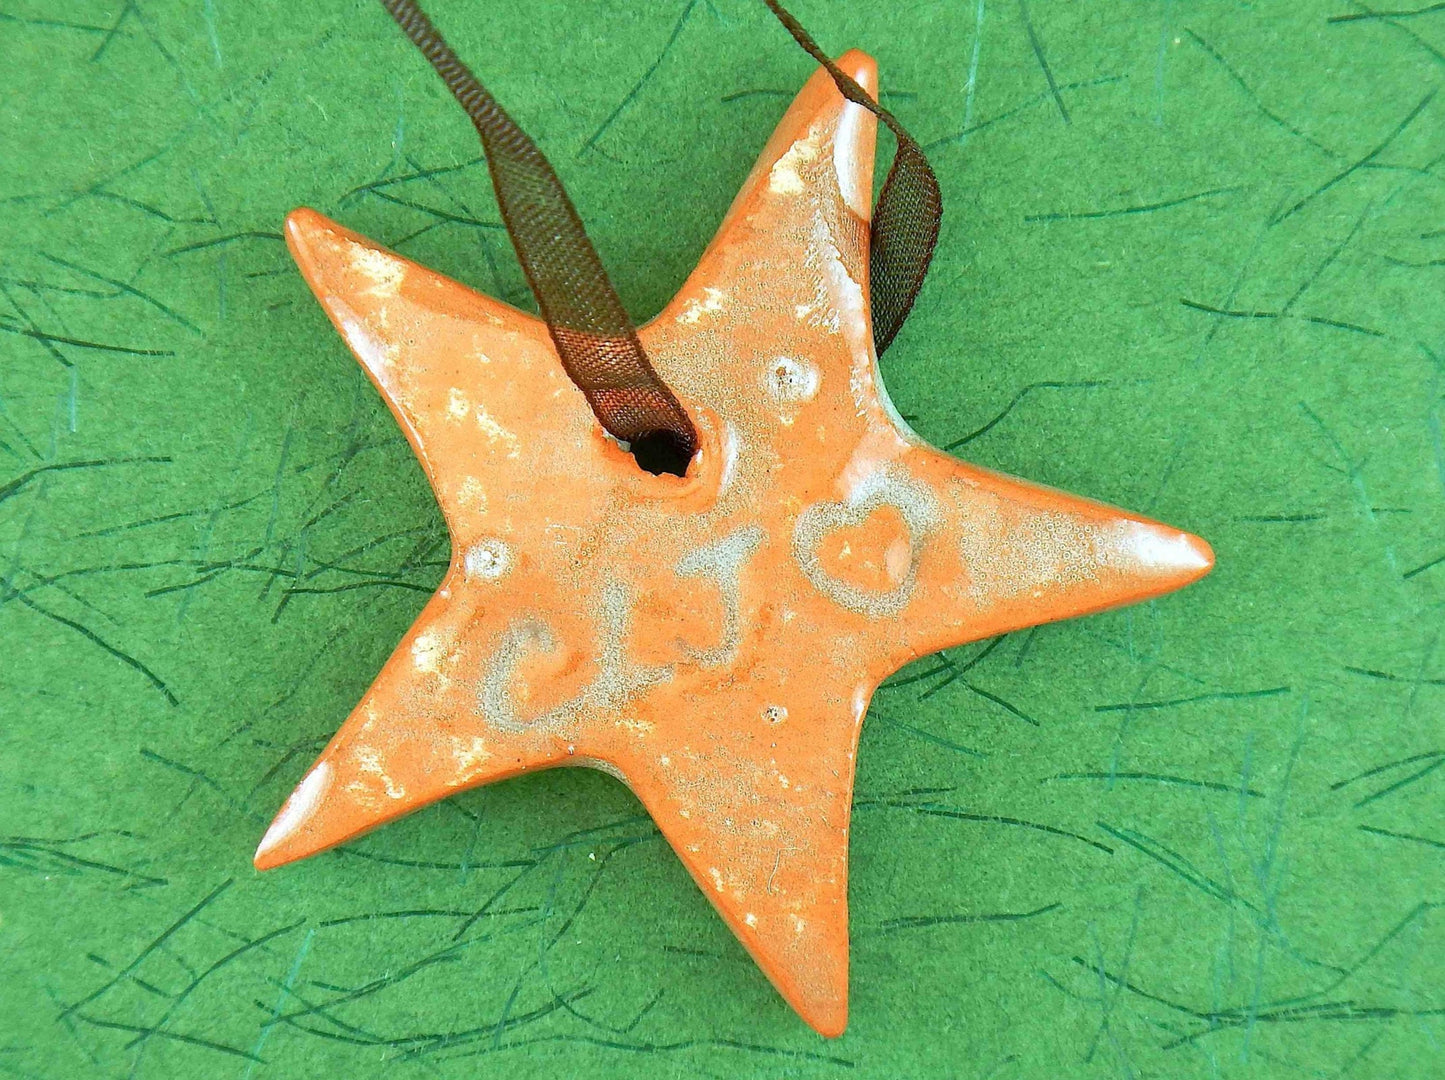 Ornament with mint green and terracotta ceramics star handmade in Montreal, chocolate brown organza ribbon